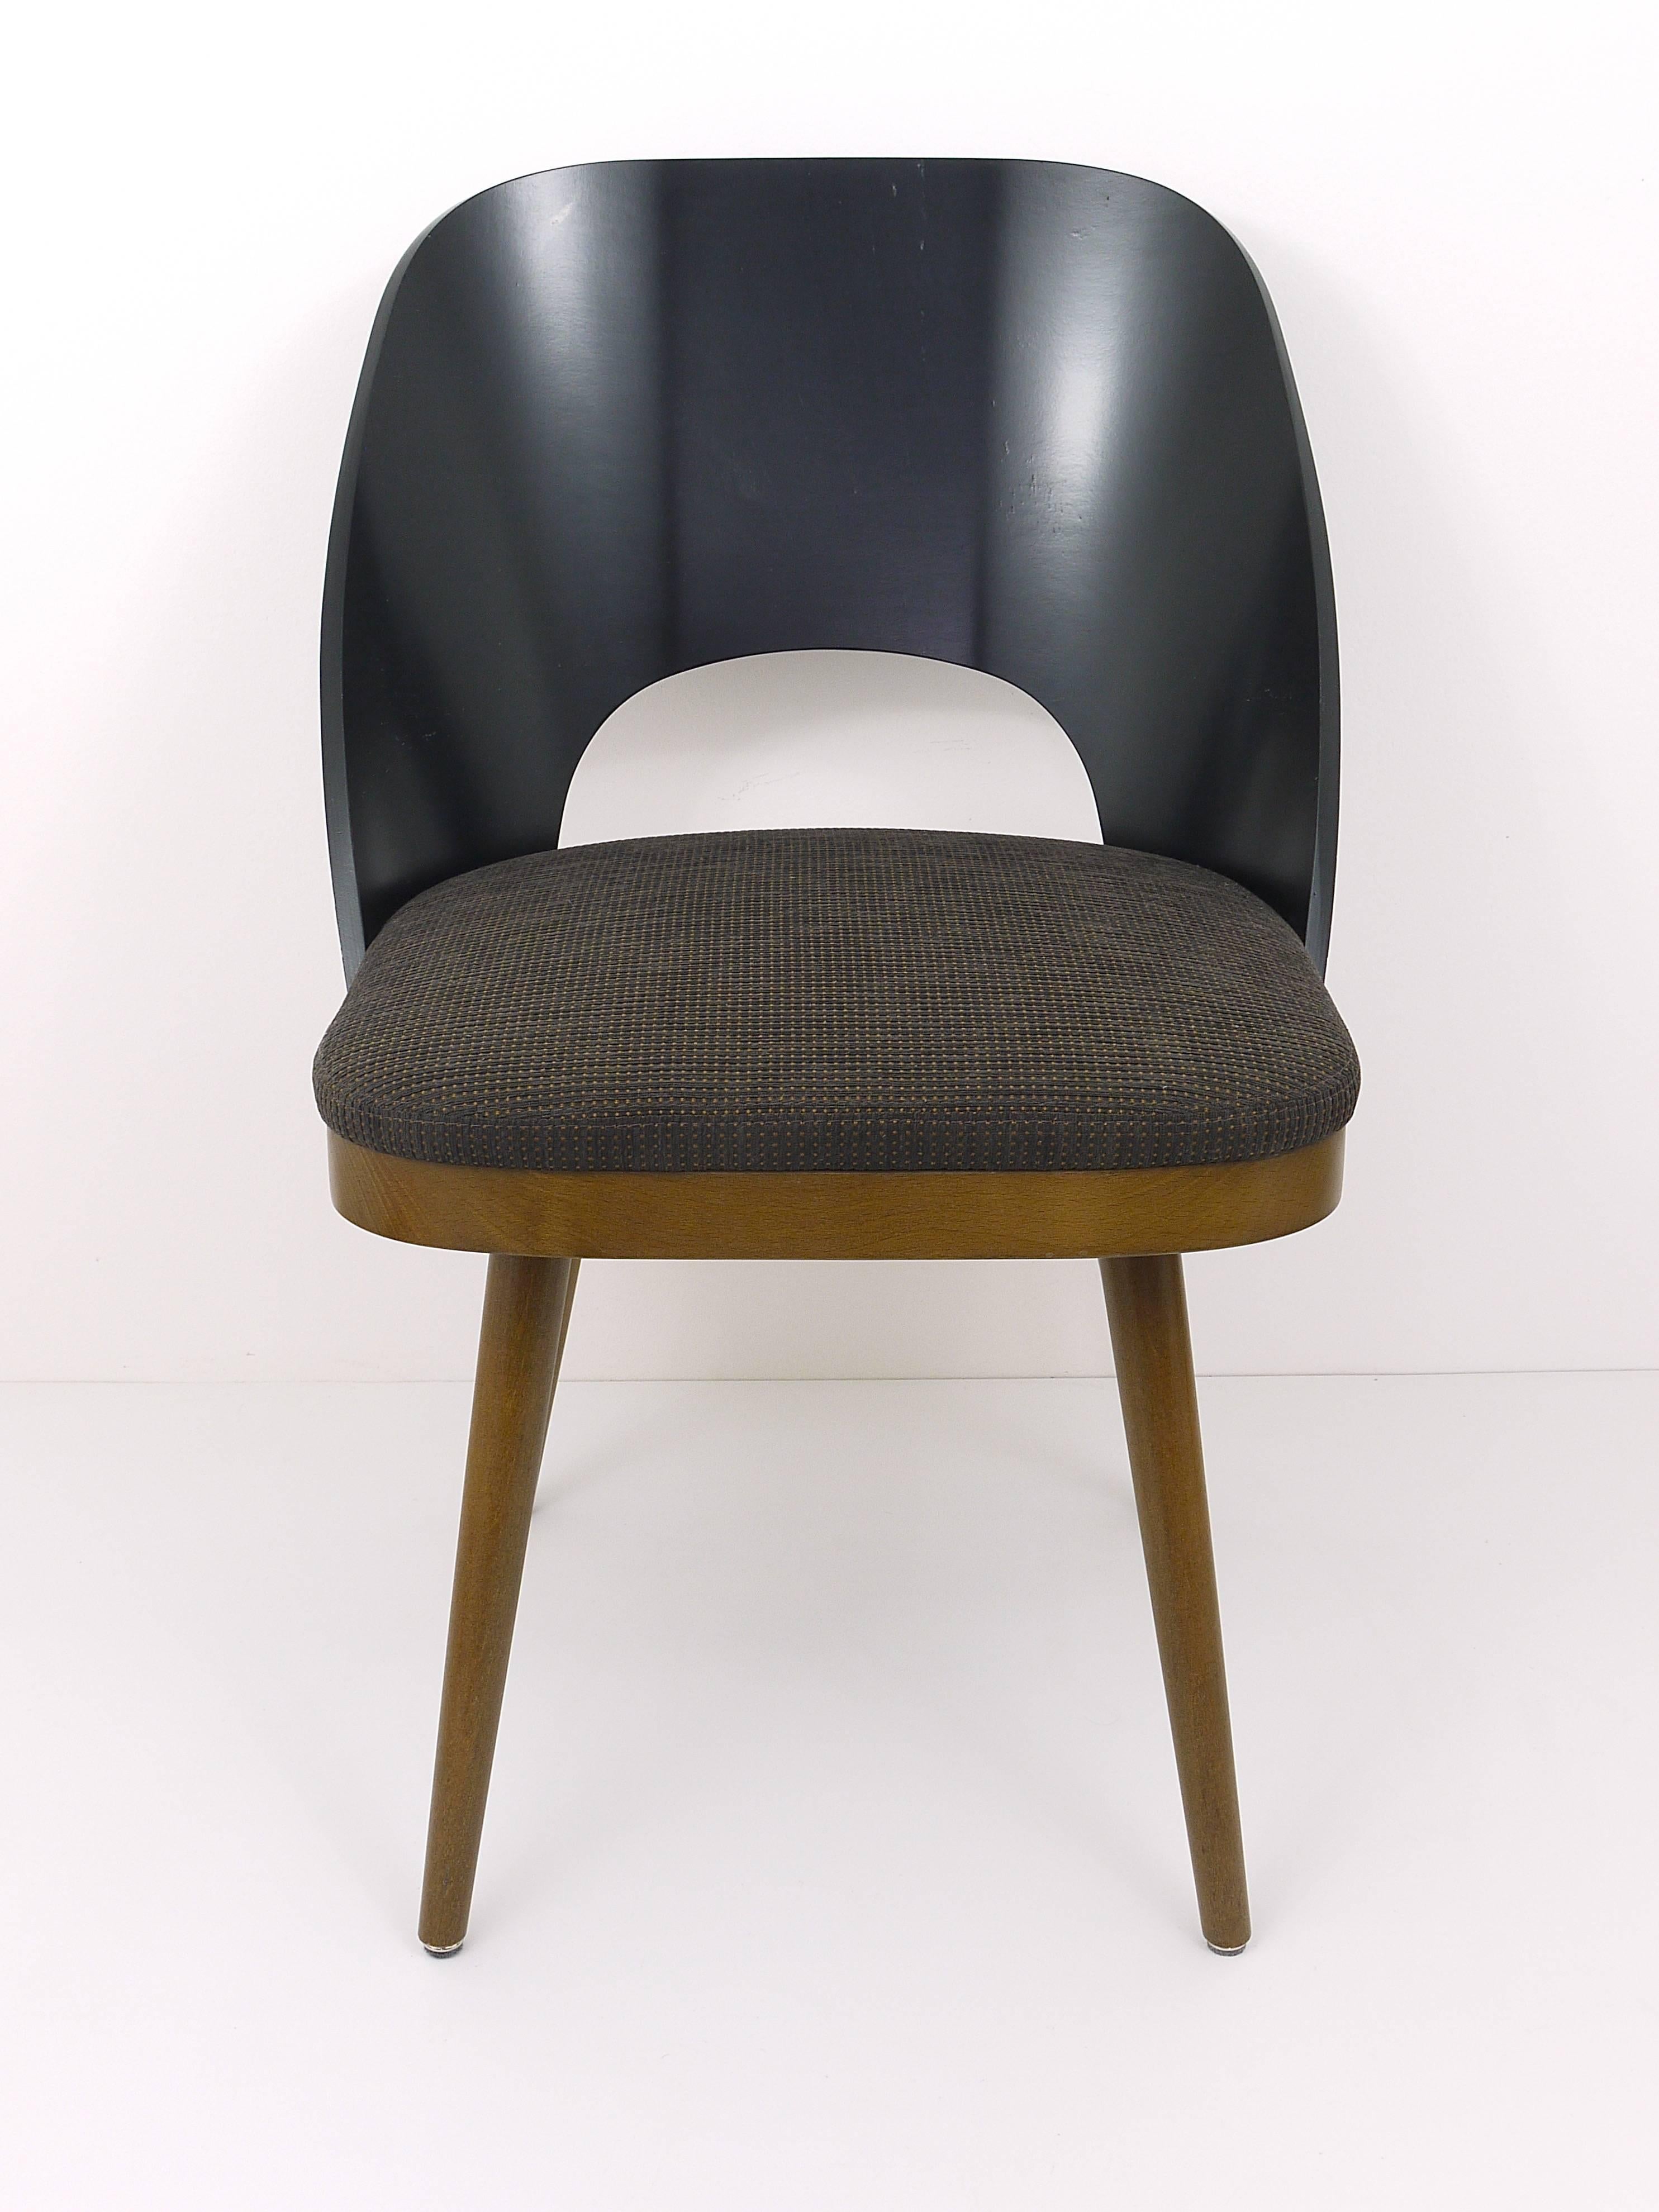 Beautiful Viennese Mid-Century chairs, commissioned by Sir Terence Conran for the boutique Hotel Guesthouse Vienna. This chair bases on the legendary coffee house chair by the Viennese architect Oswald Haerdtl. For recreational reasons the petite